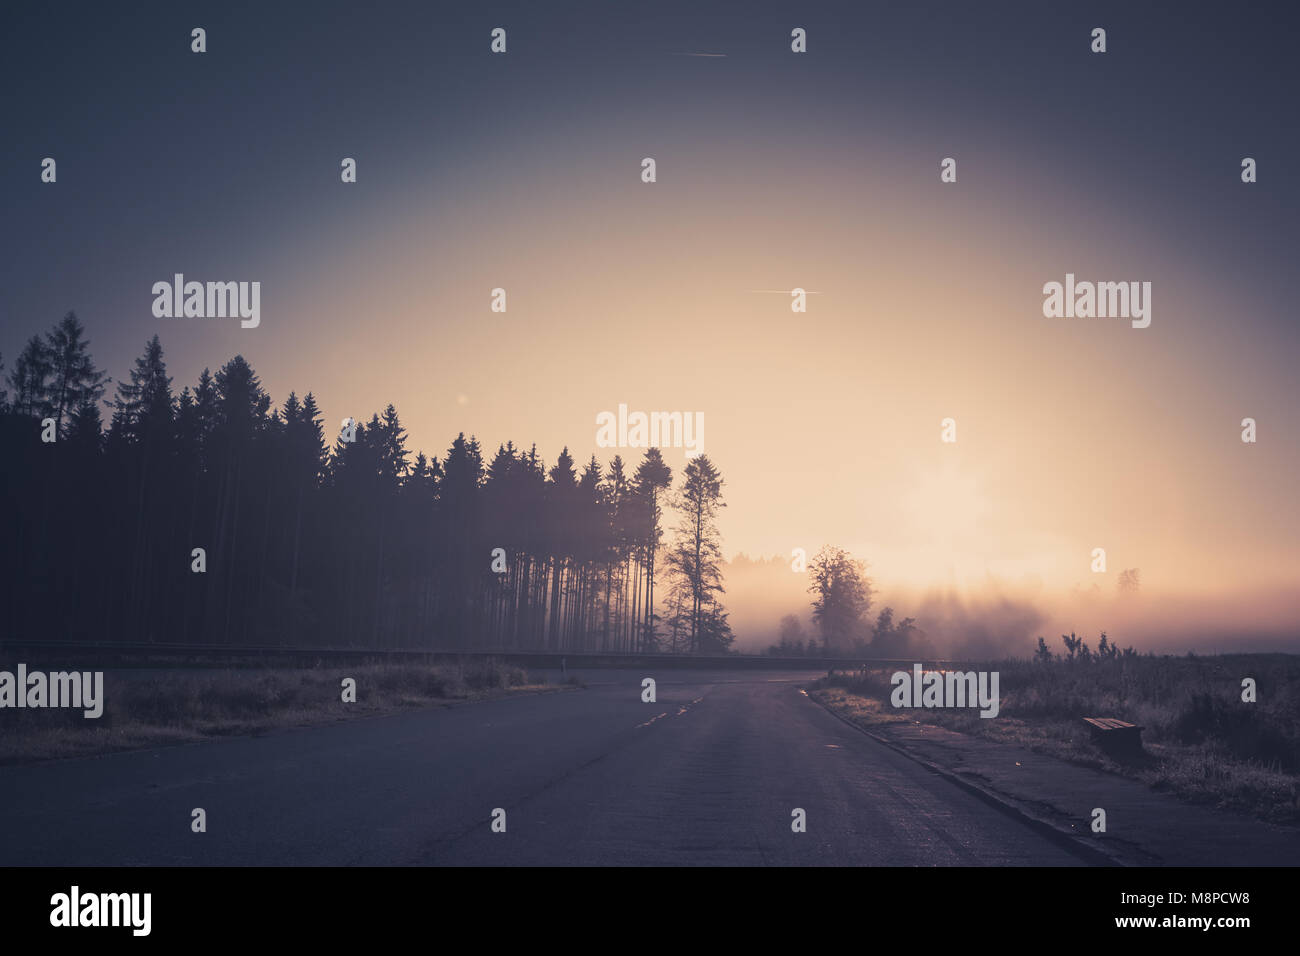 Surreal, romantic sunrise at the misty, foggy countryside. Stock Photo